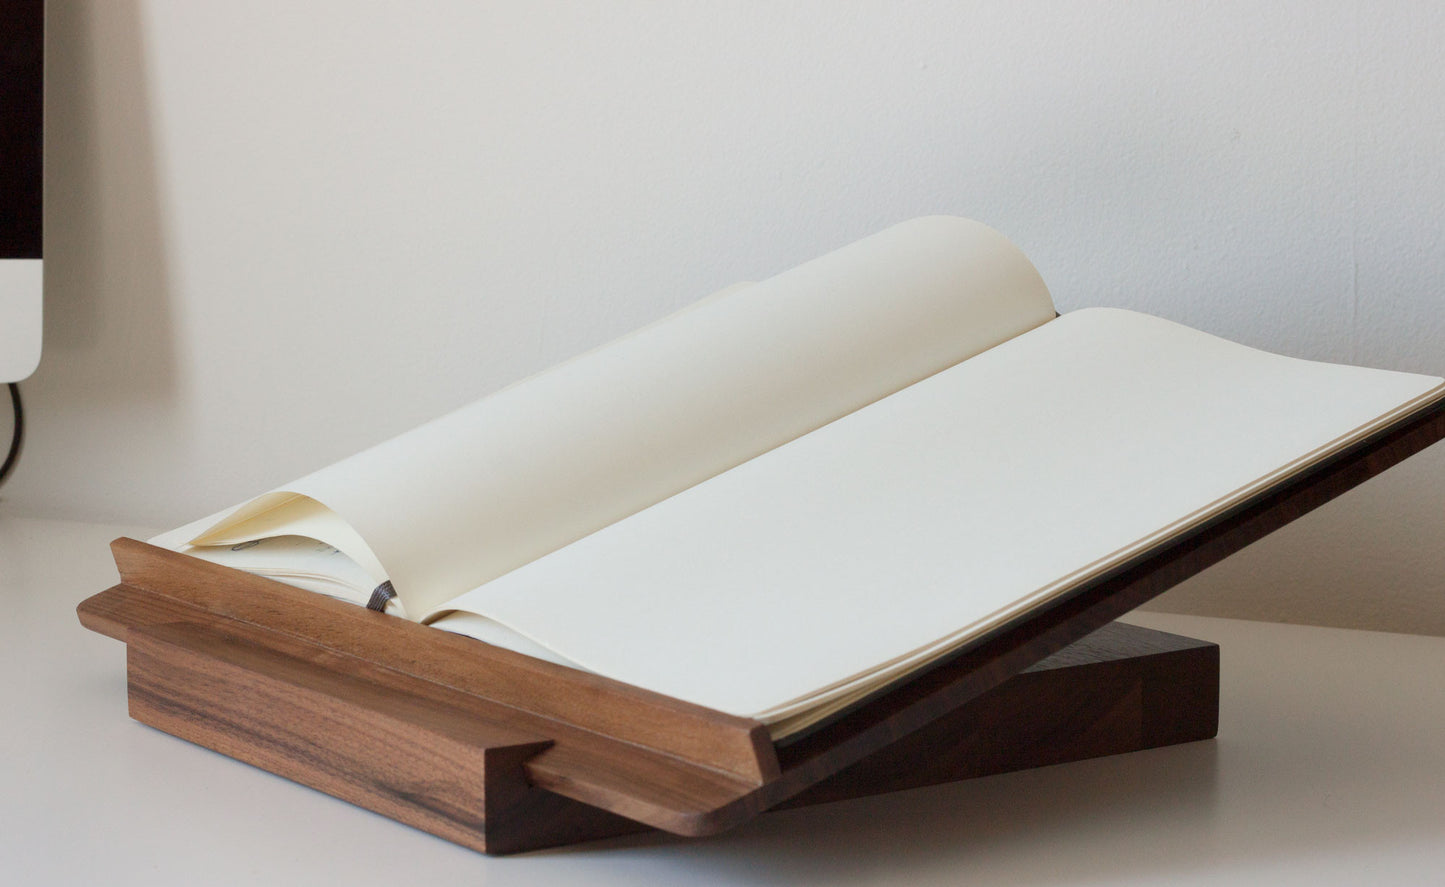 The book stand: a new custom project